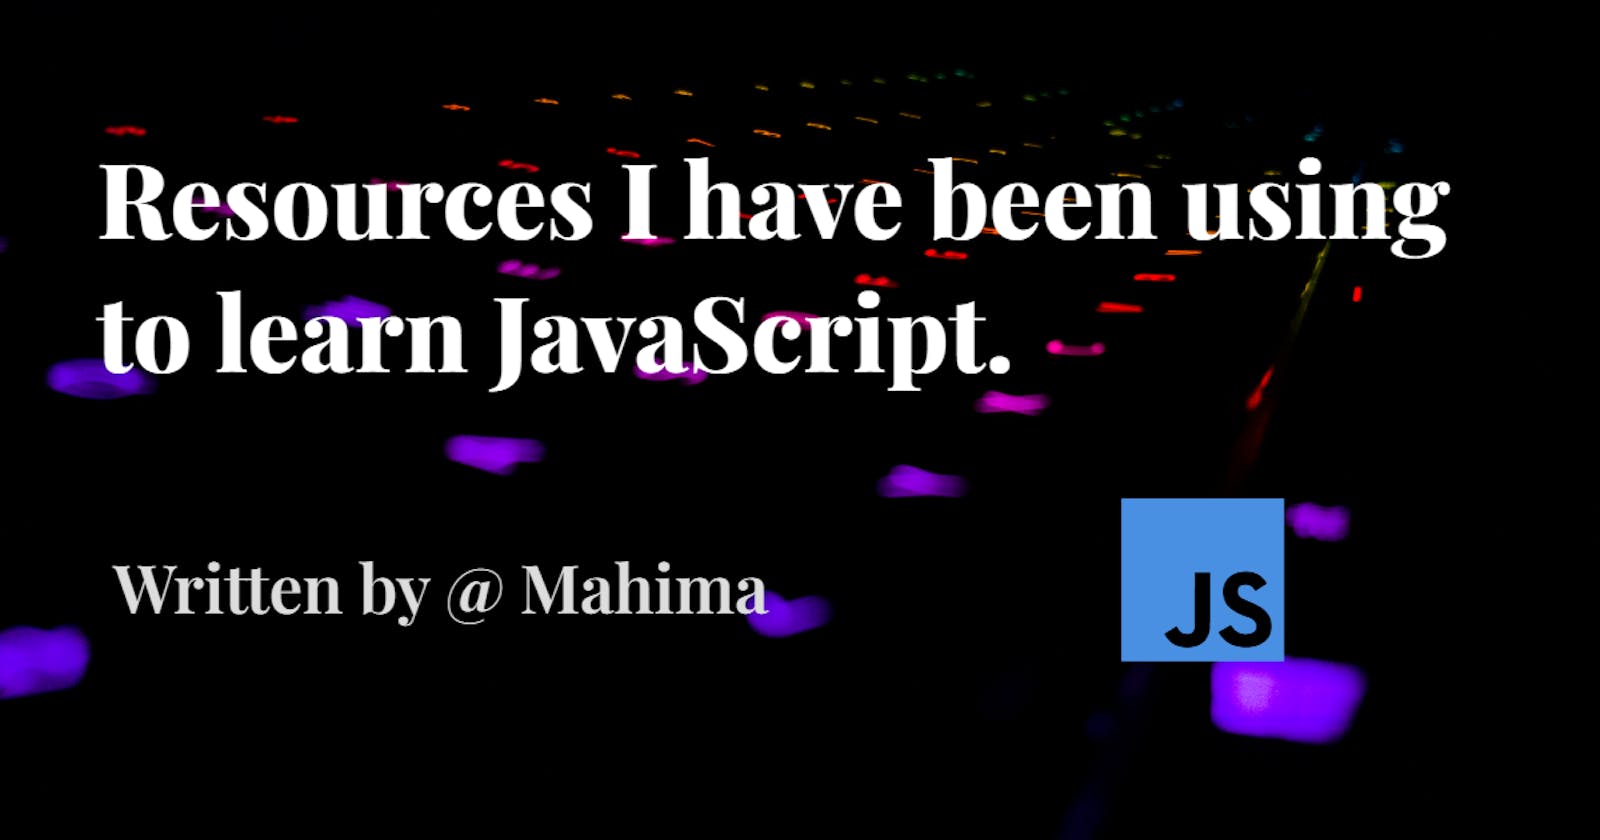 Resources I have been using to learn JavaScript.